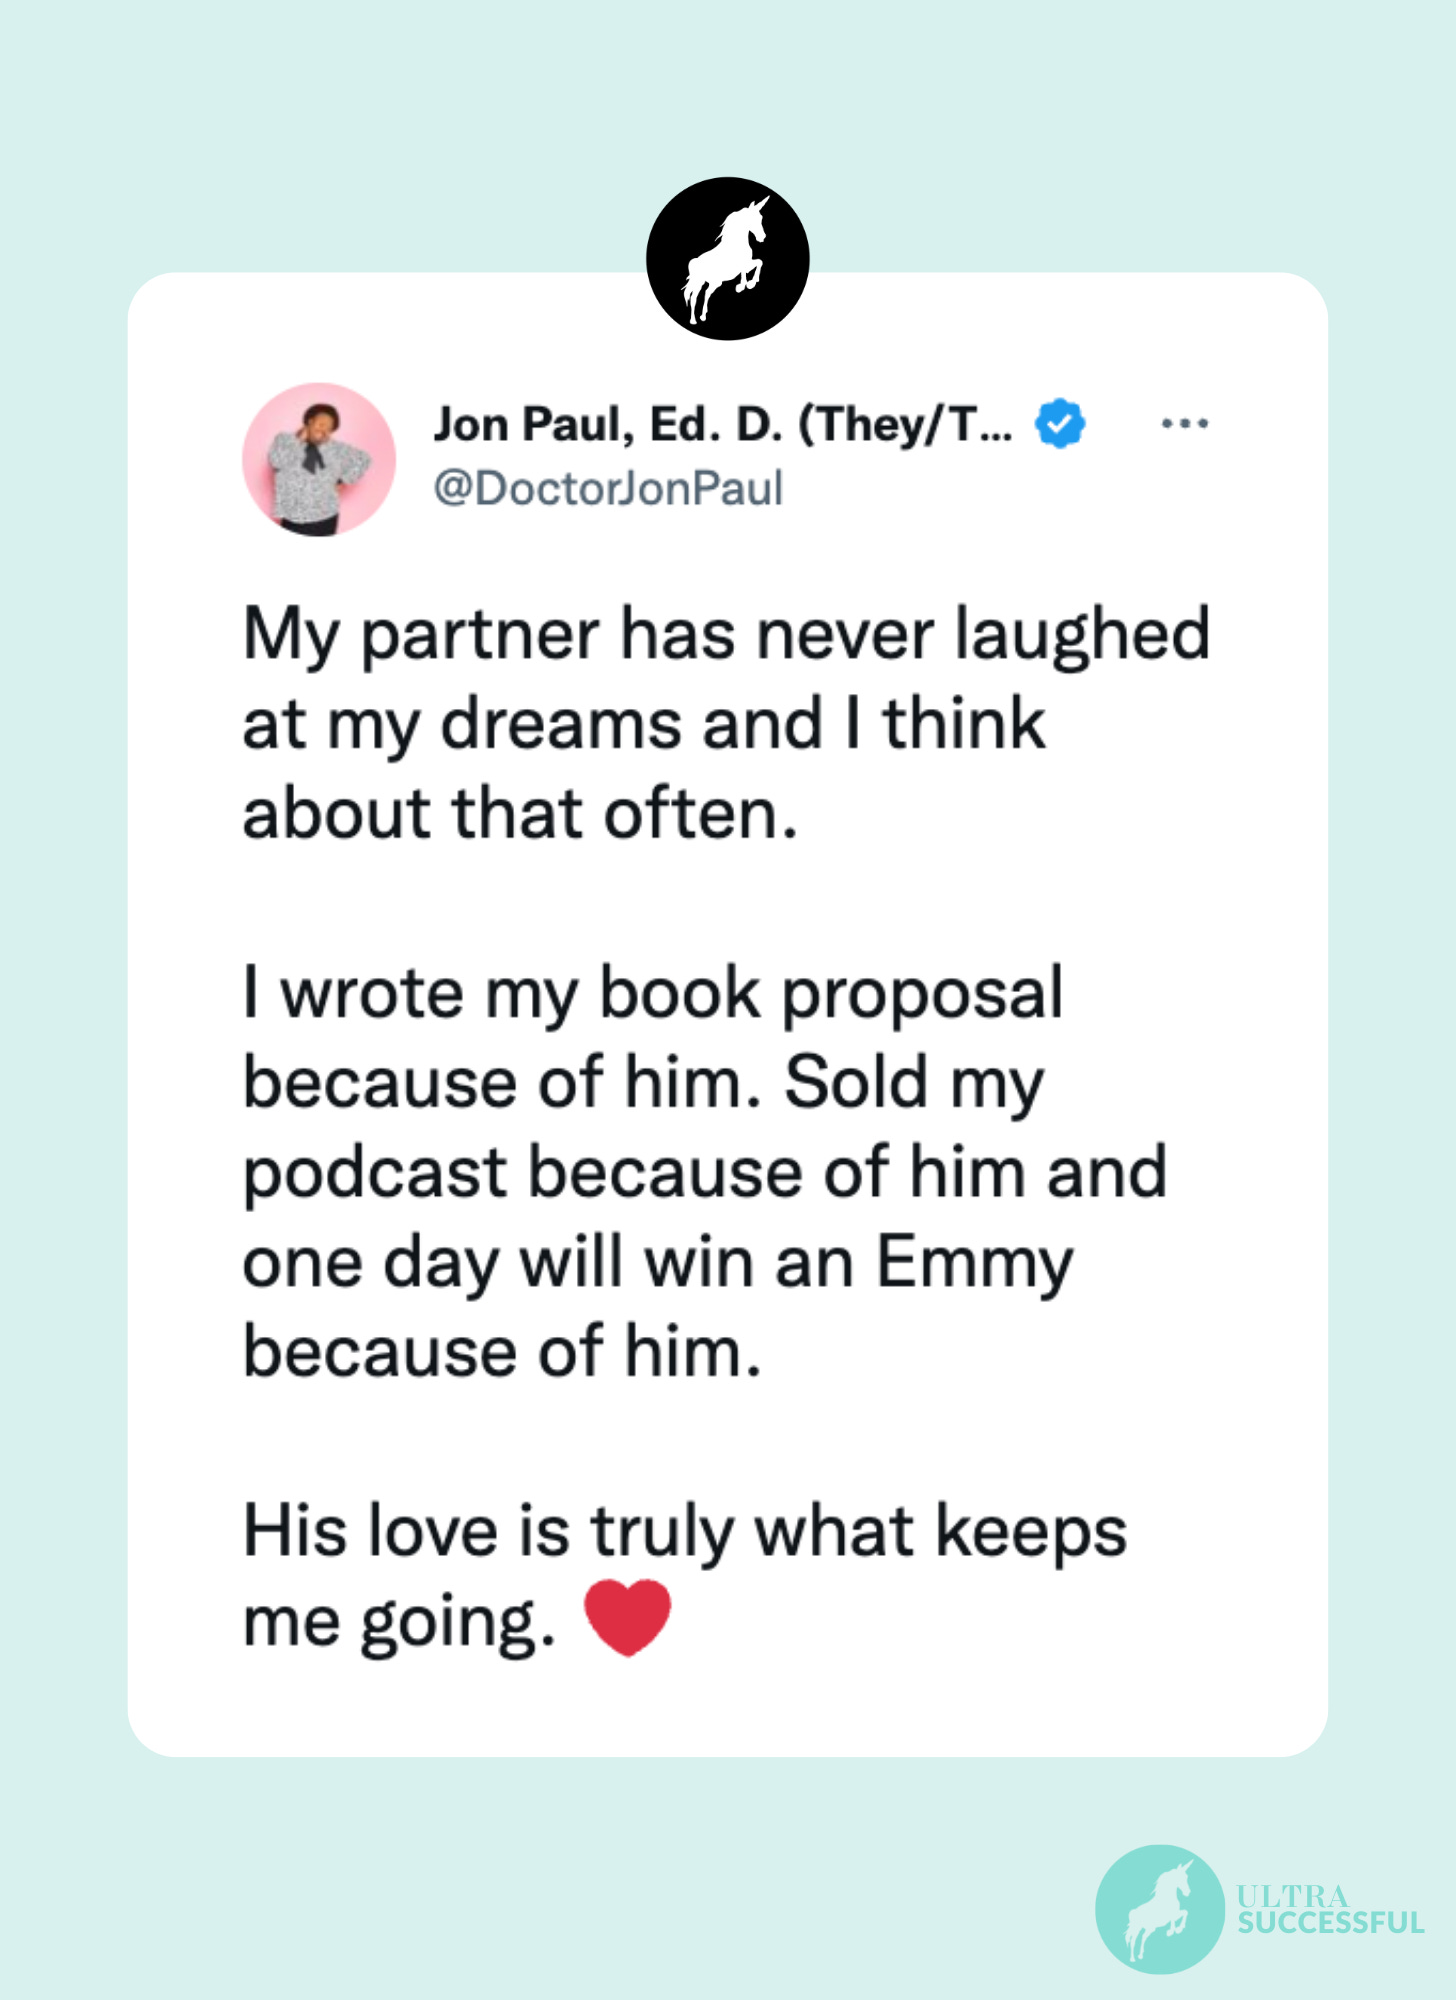 @DoctorJonPaul: My partner has never laughed at my dreams and I think about that often.   I wrote my book proposal because of him. Sold my podcast because of him and one day will win an Emmy because of him.   His love is truly what keeps me going. ❤️